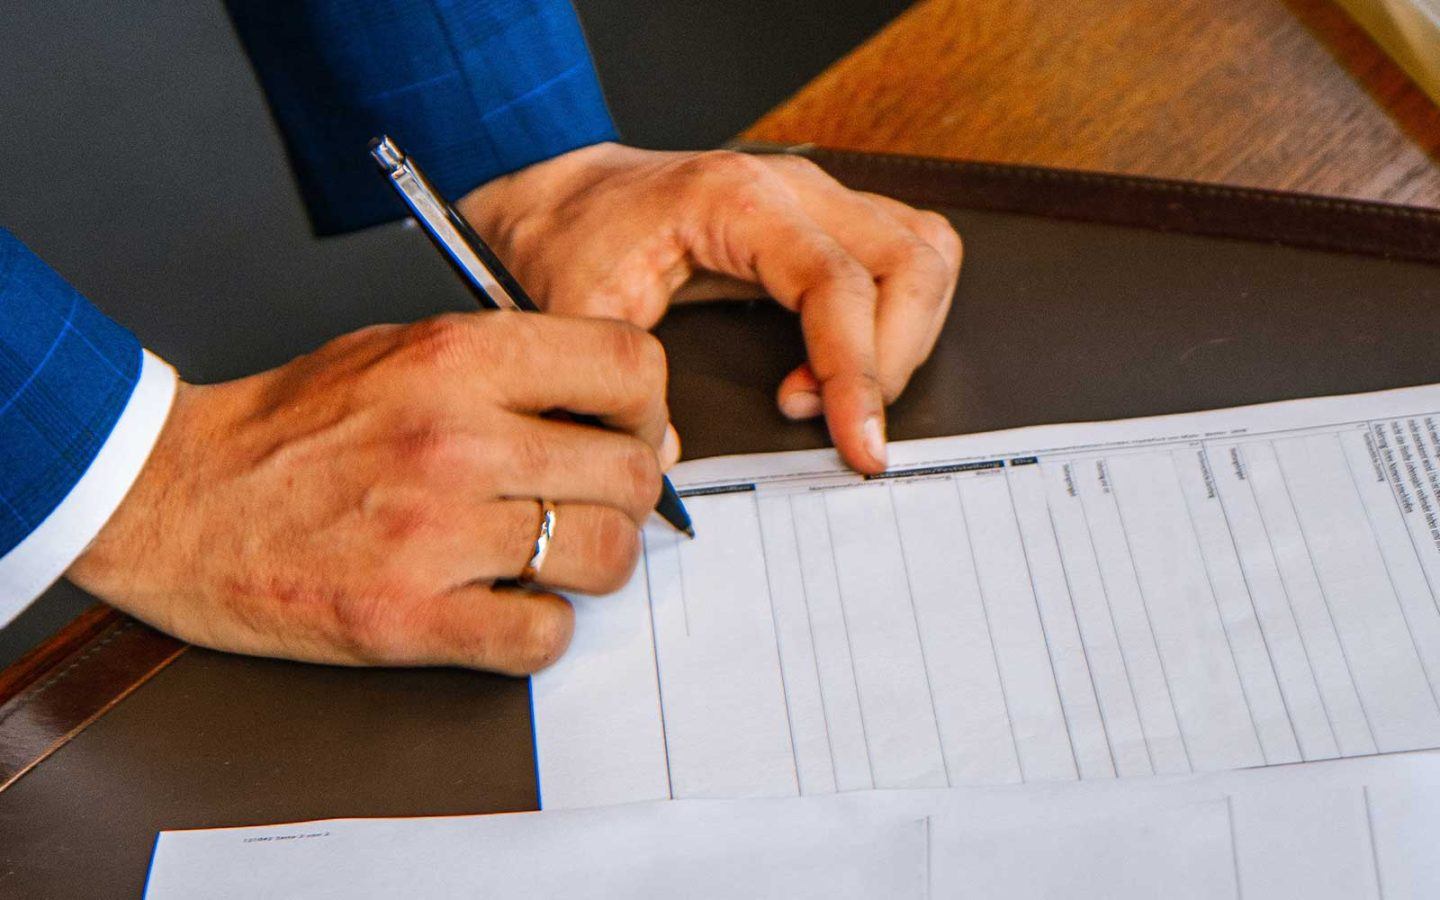 close up photo of a man's hand holding a pen and signing a document